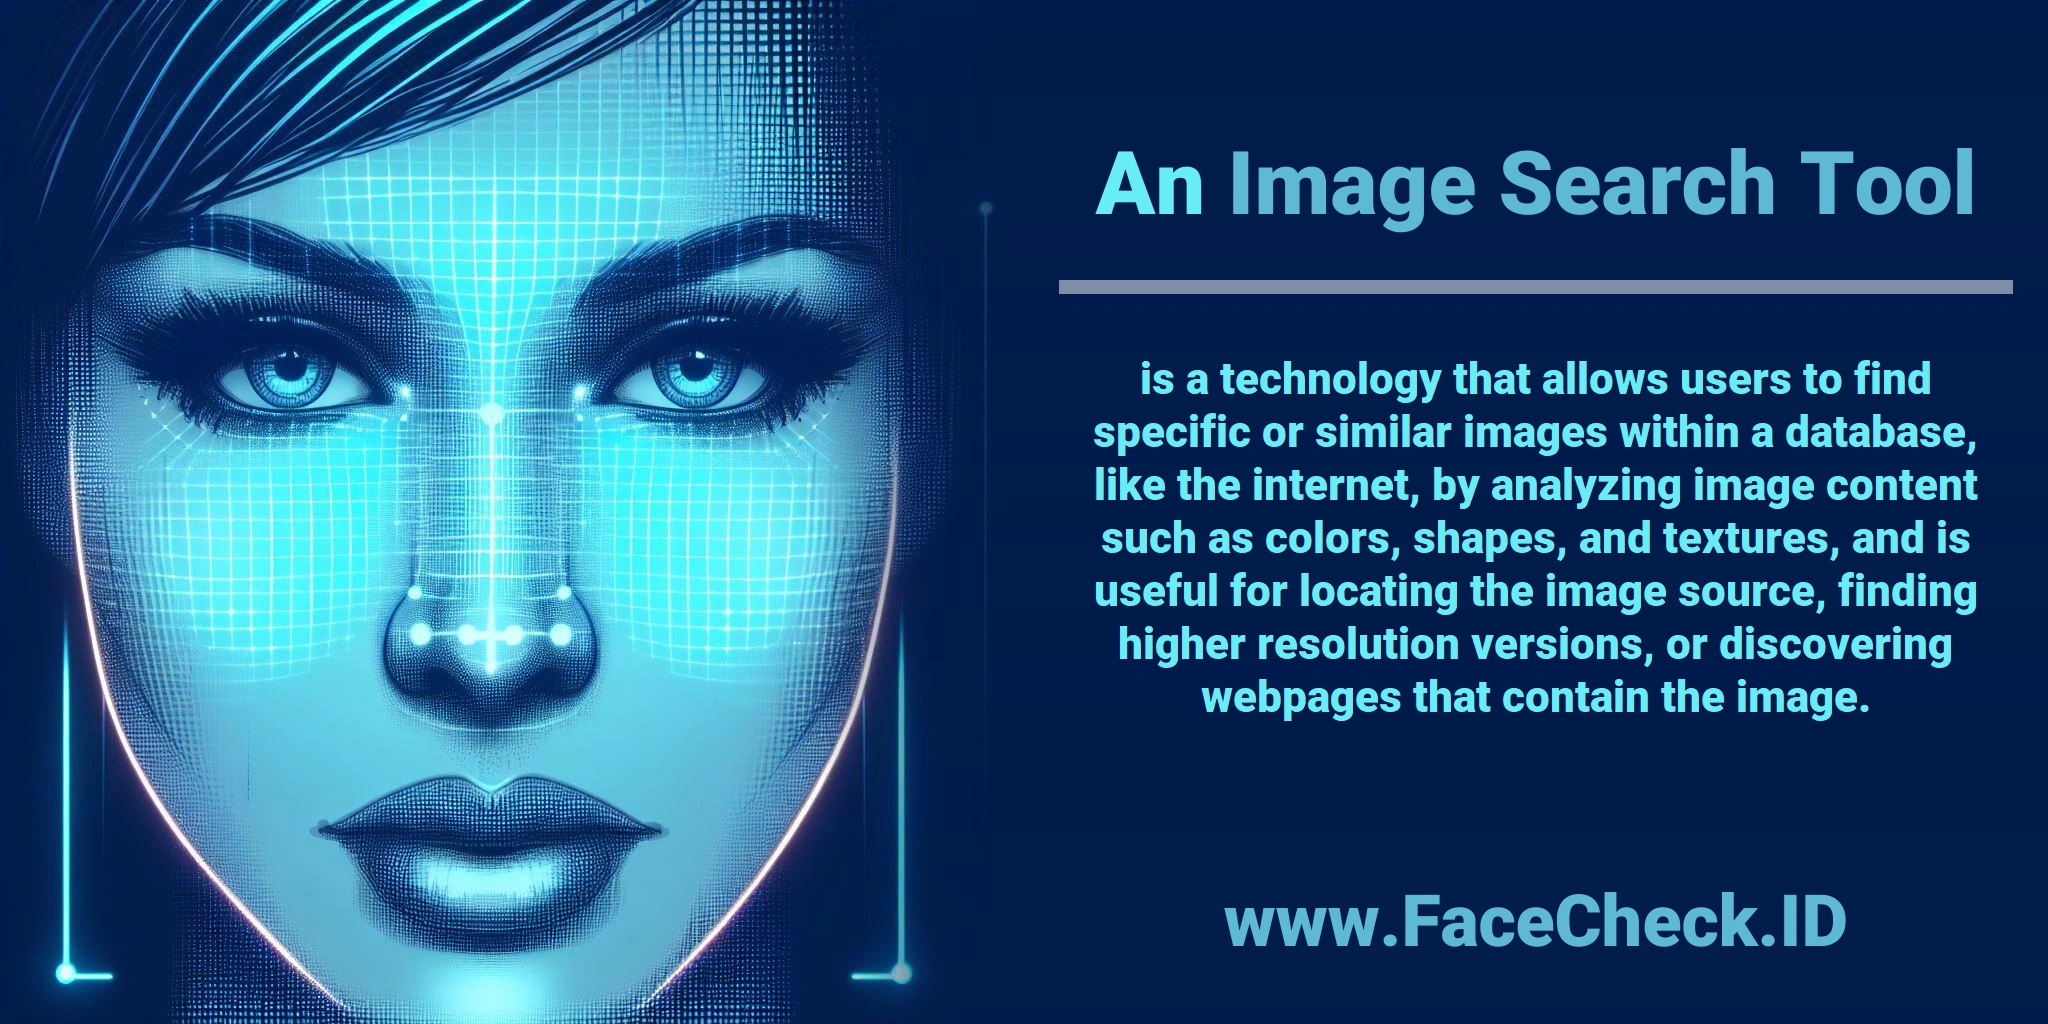 An <b>Image Search Tool</b> is a technology that allows users to find specific or similar images within a database, like the internet, by analyzing image content such as colors, shapes, and textures, and is useful for locating the image source, finding higher resolution versions, or discovering webpages that contain the image.